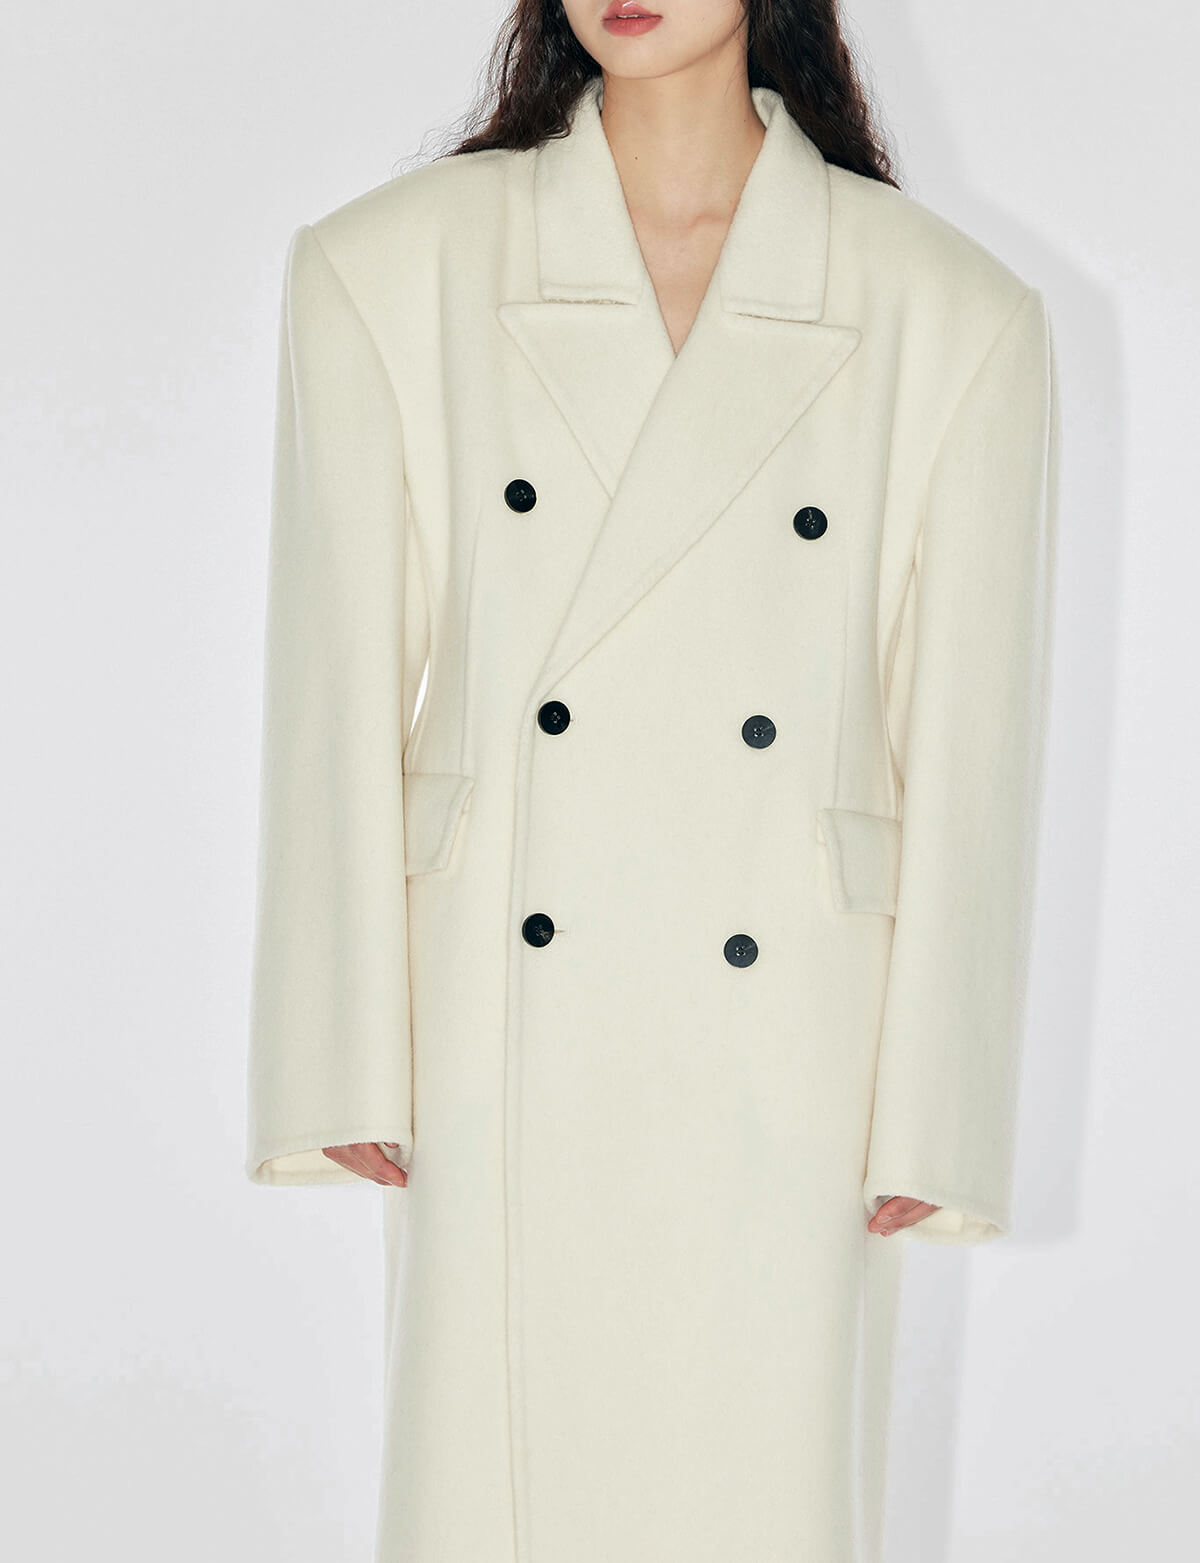 White Maxi Double Breasted Coat-BESTSELLER